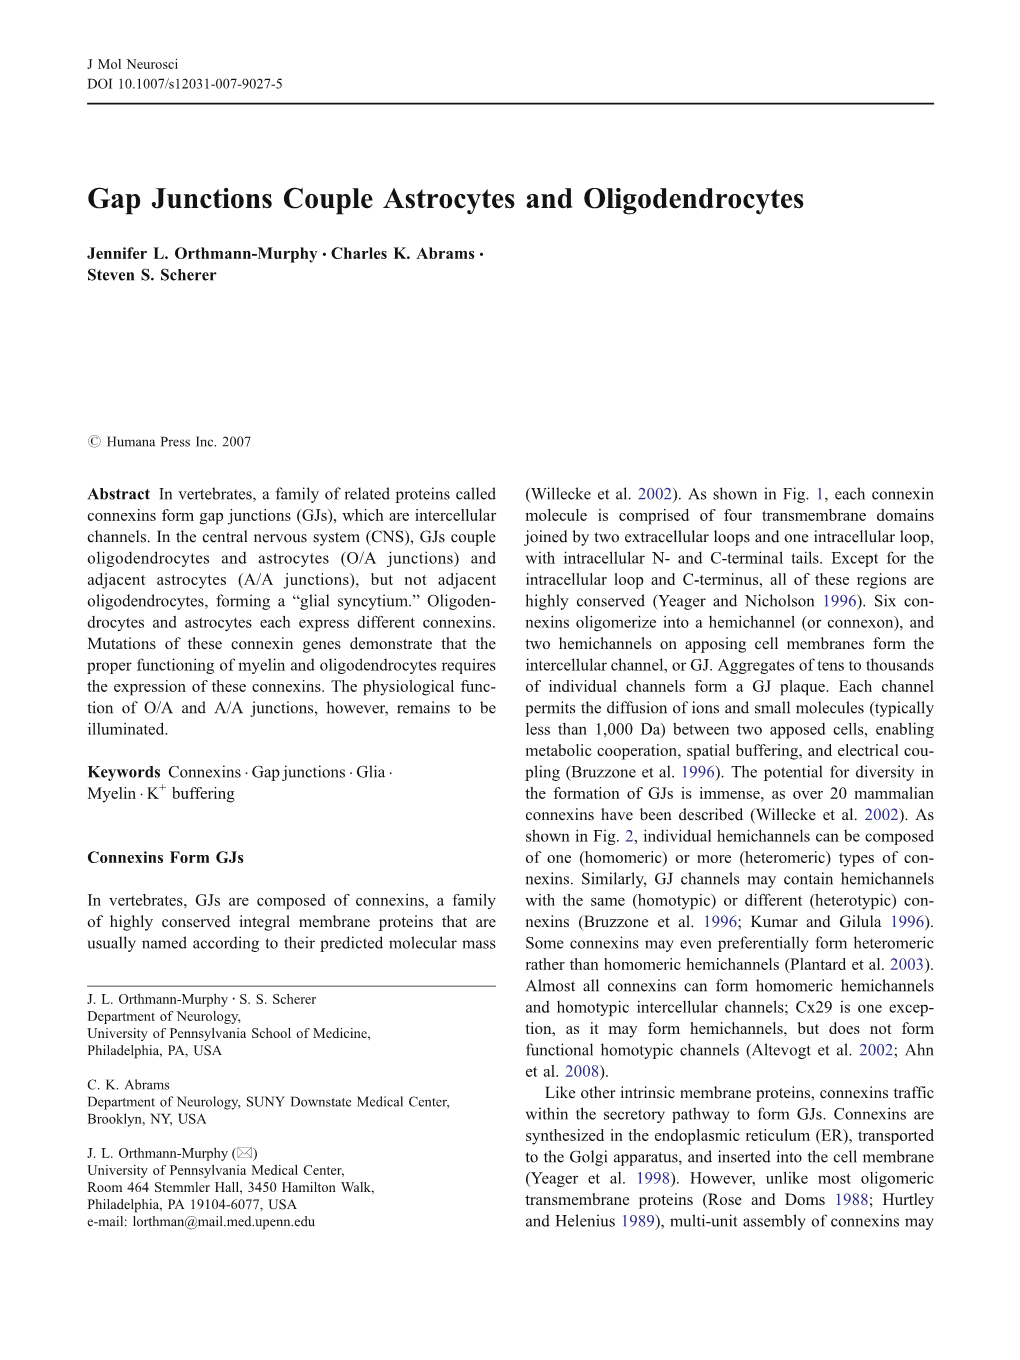 Gap Junctions Couple Astrocytes and Oligodendrocytes